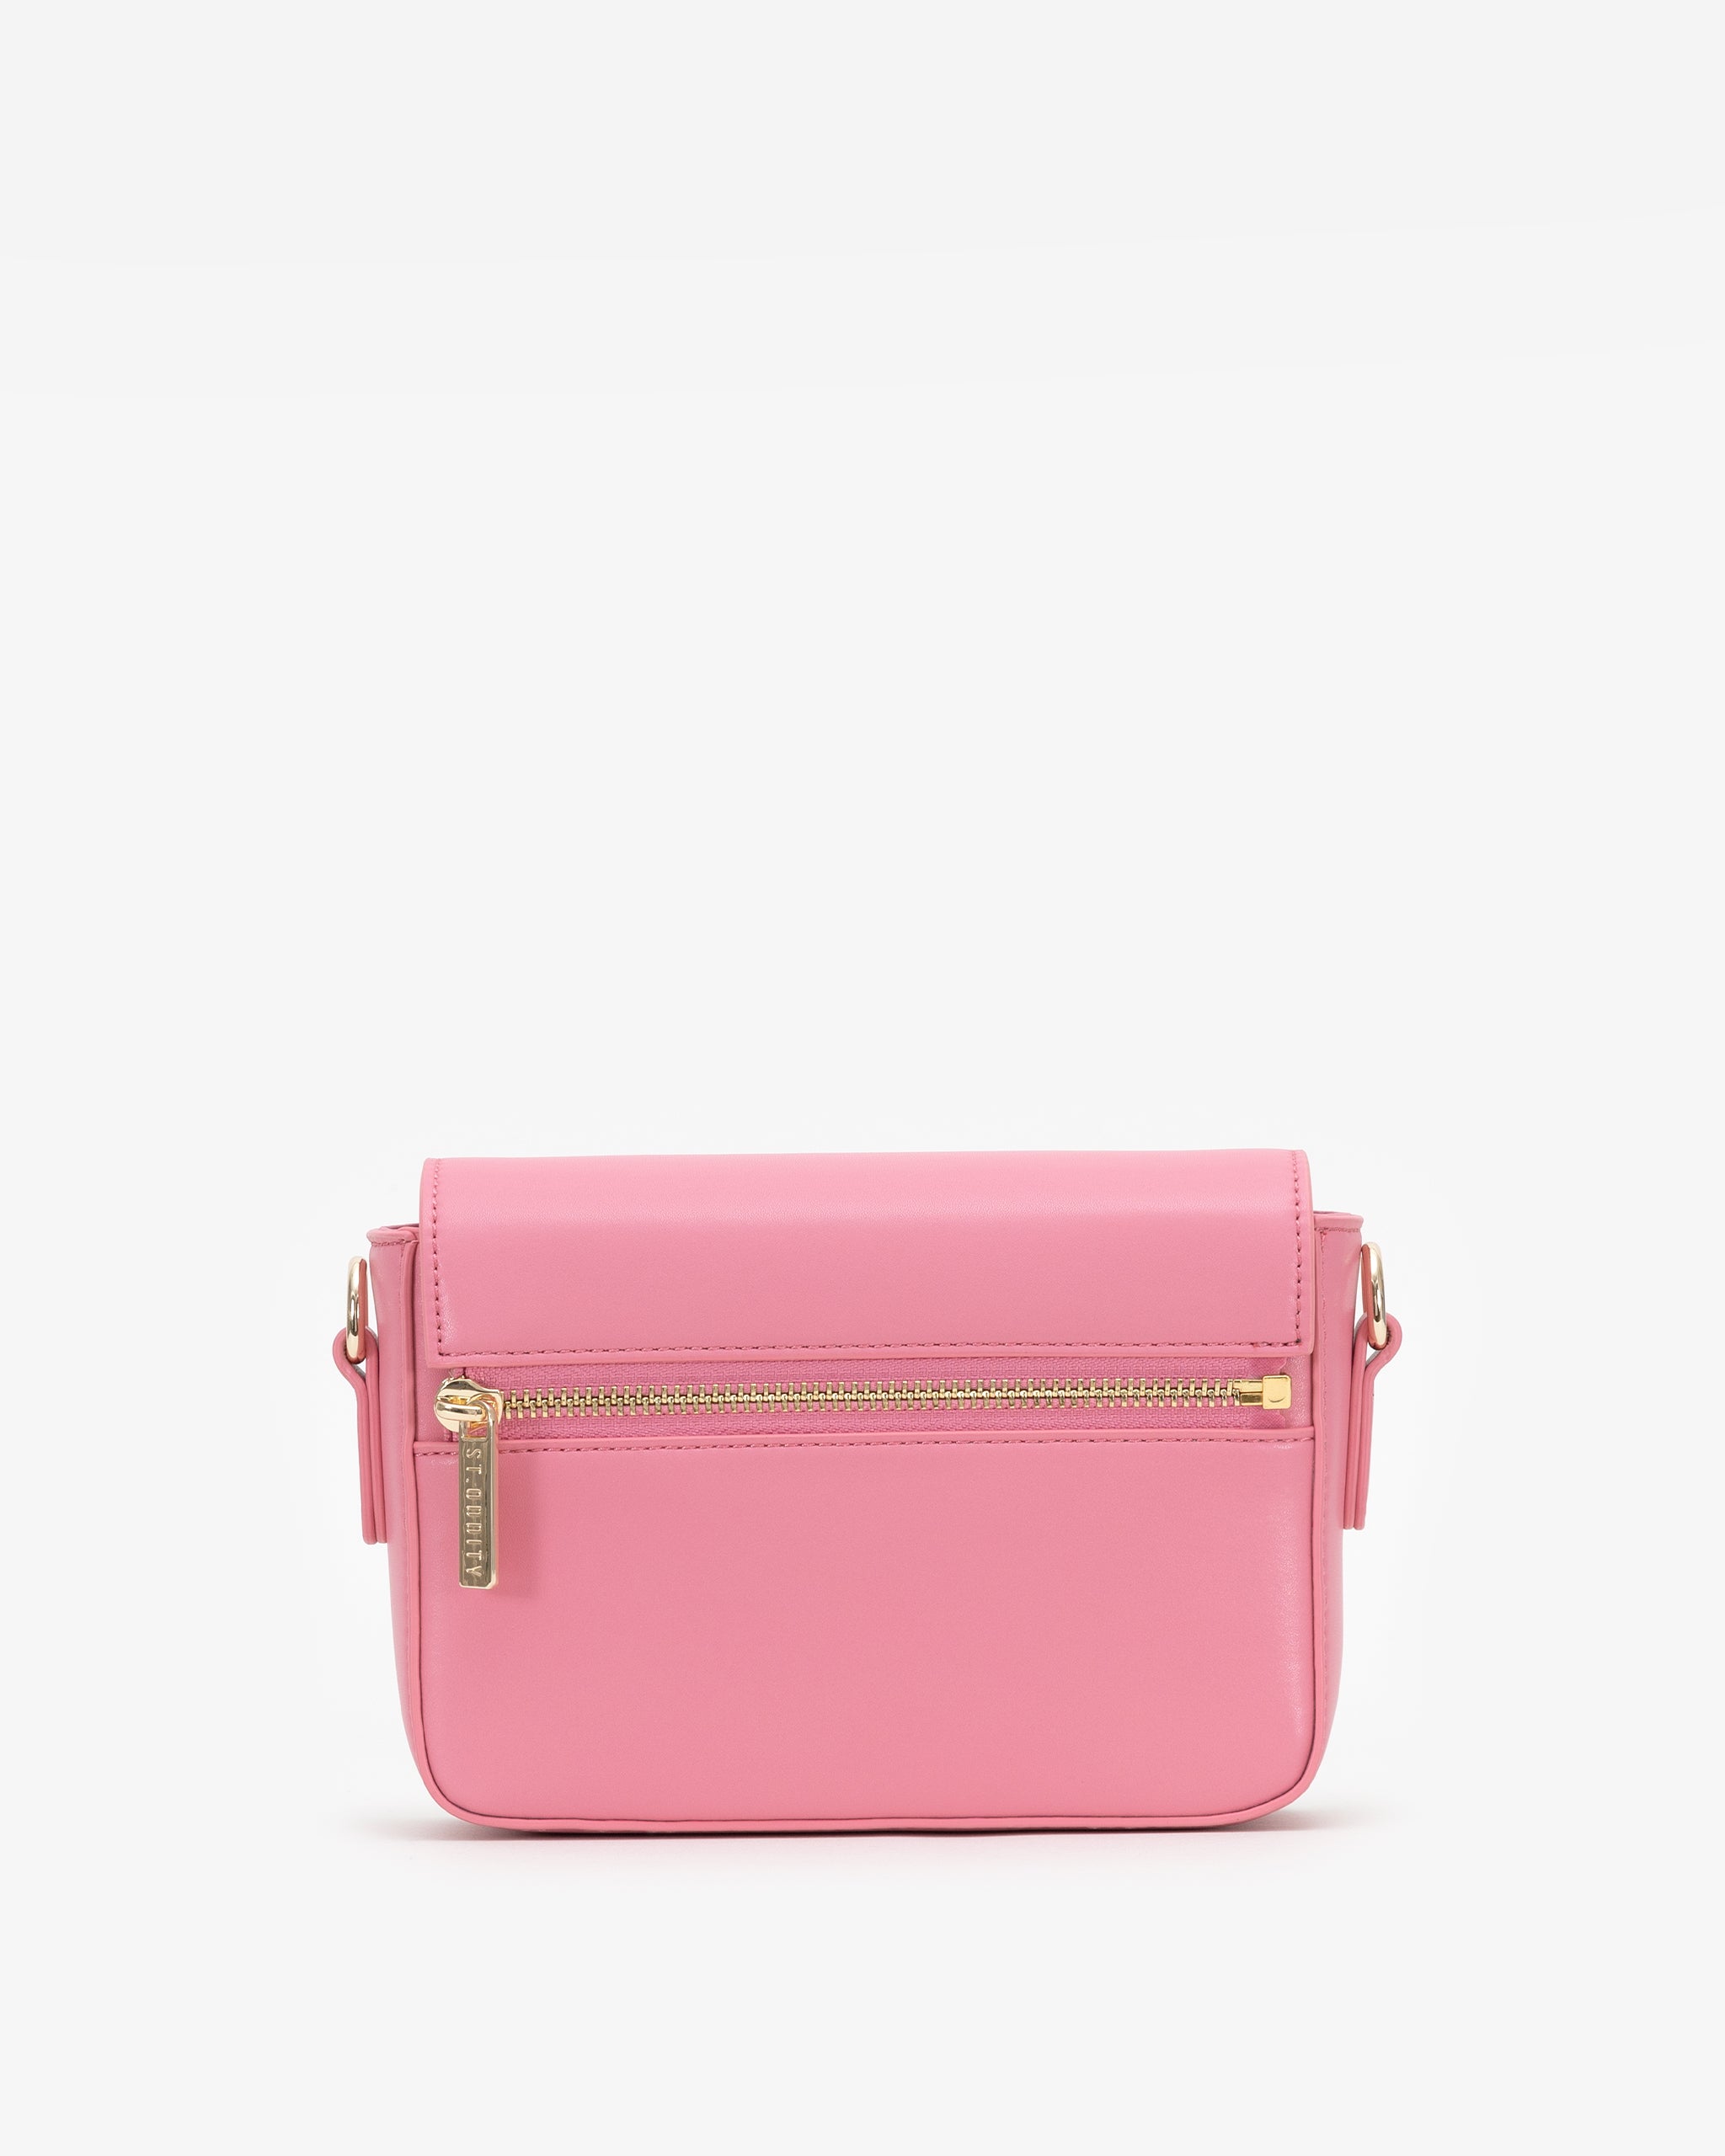 Crossbody Bag in Bubblegum with Personalised Hardware